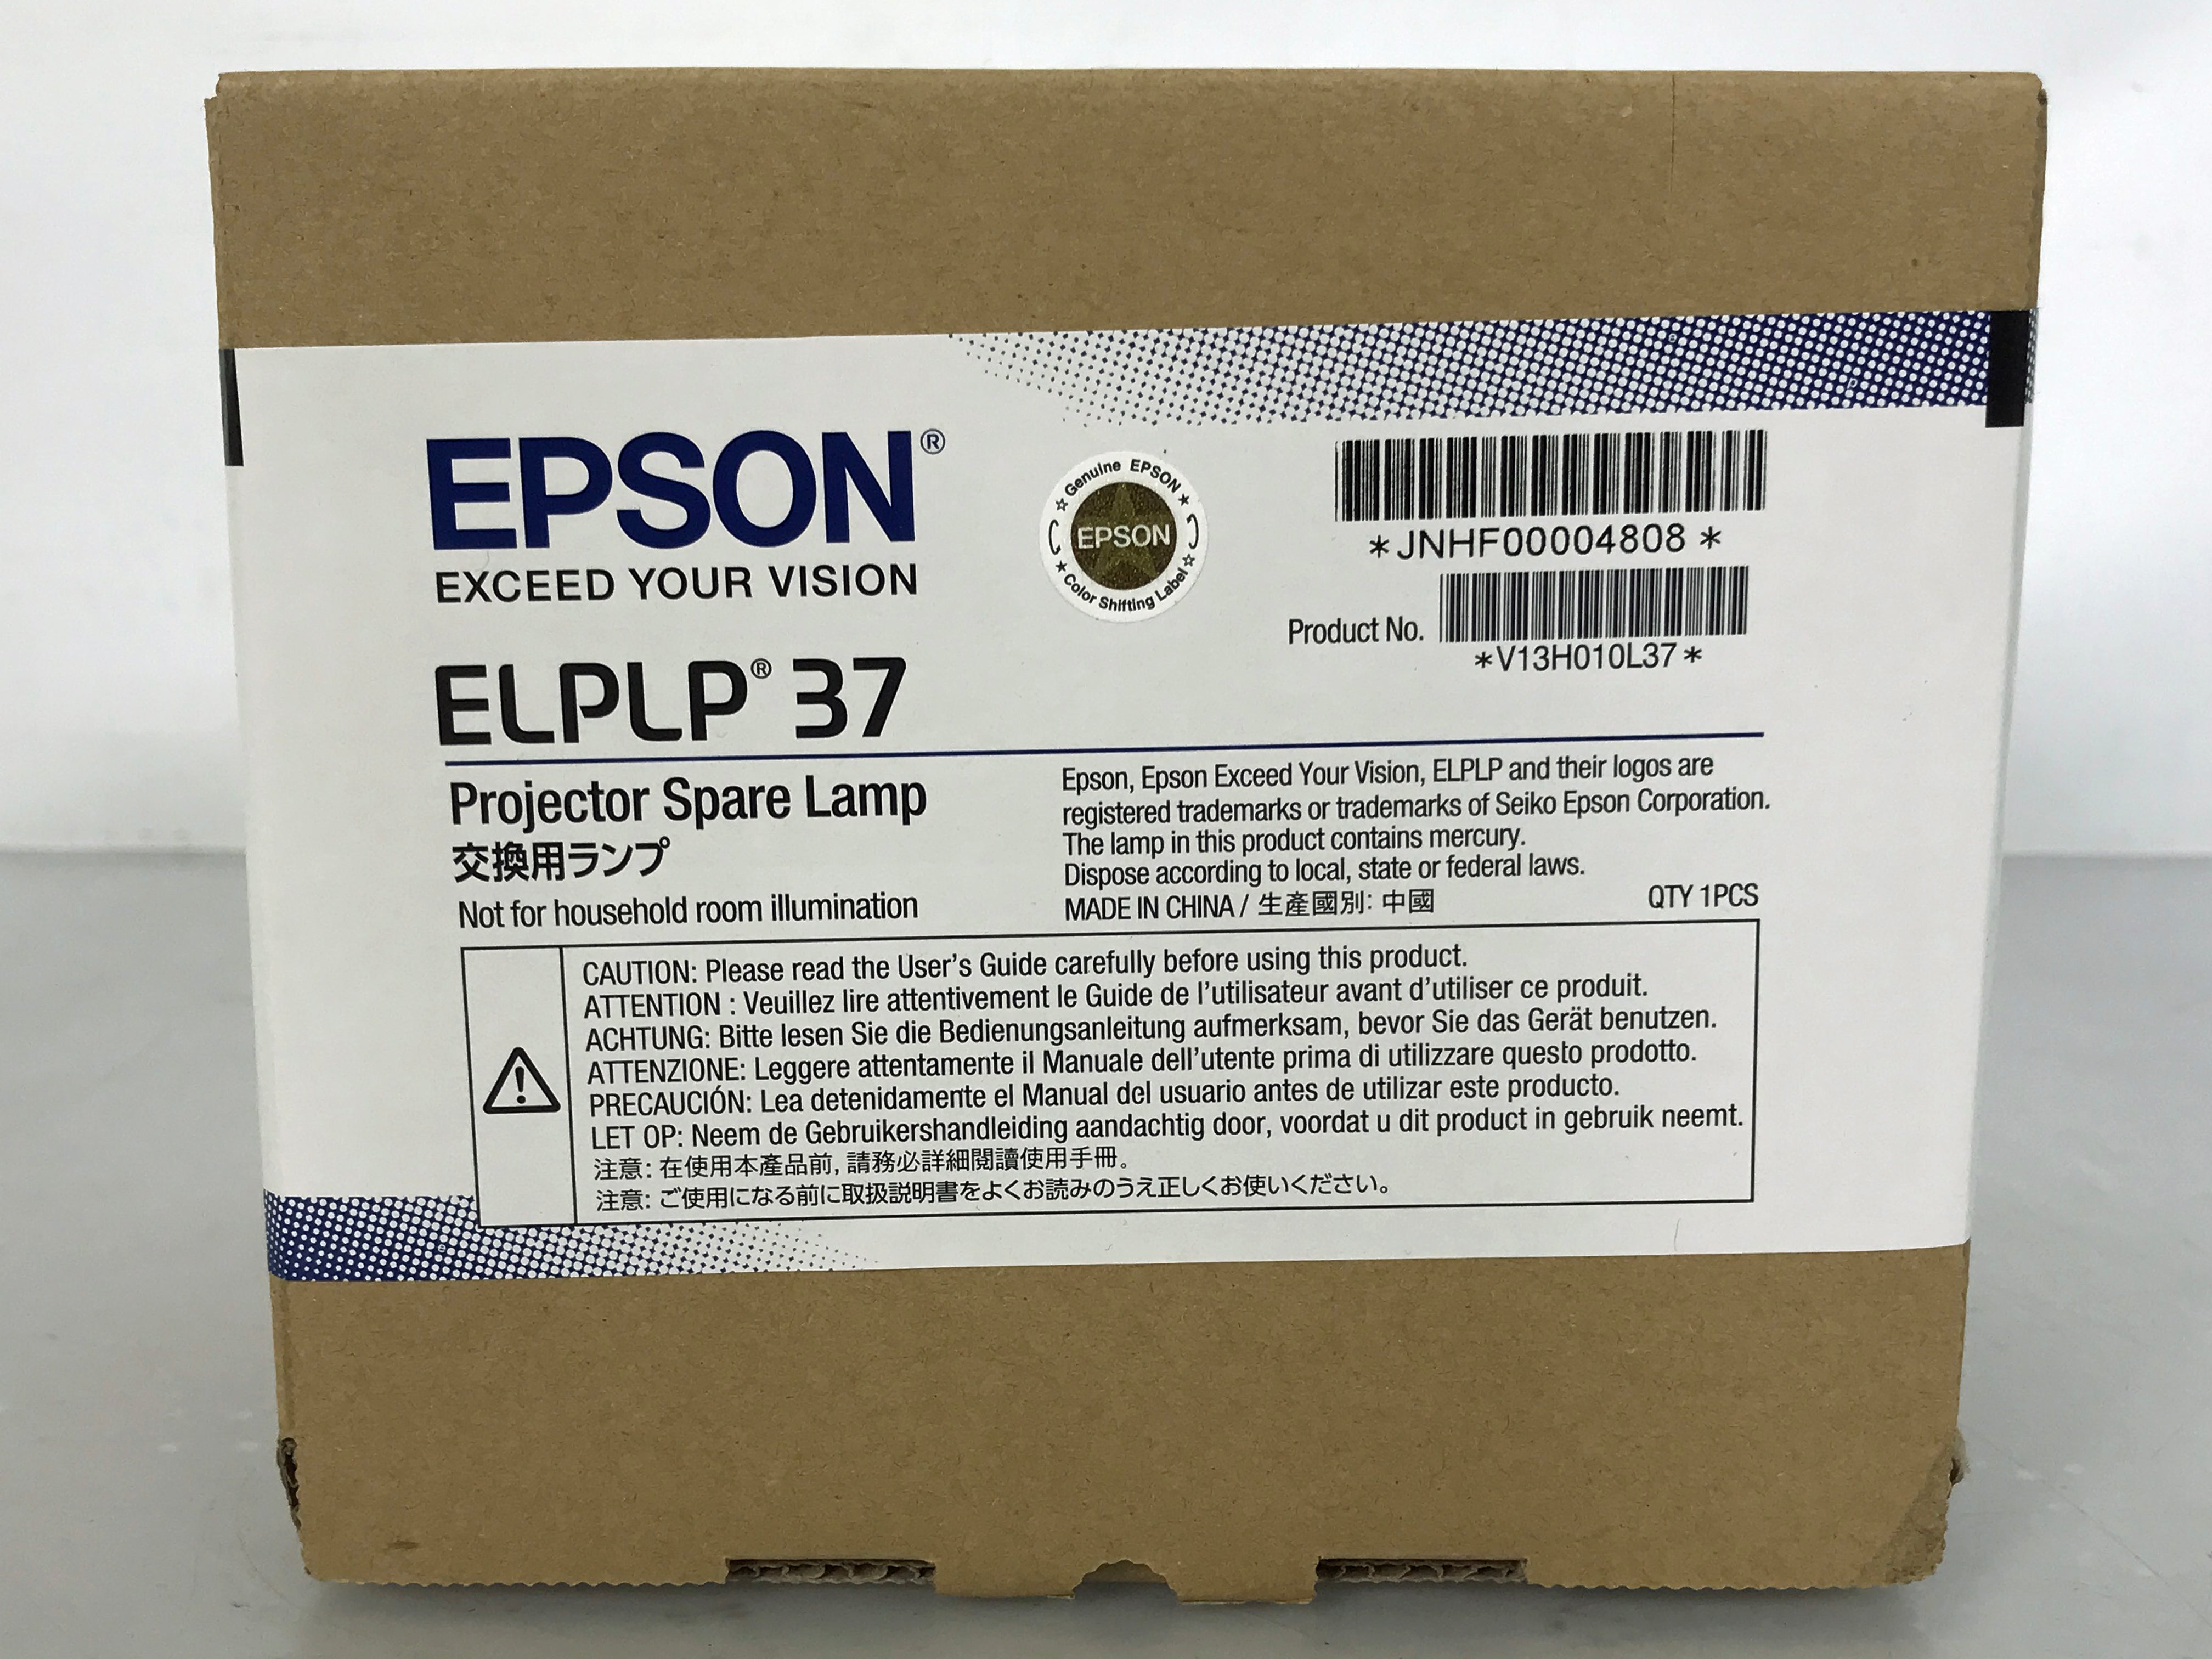 Epson Projector Spare Lamp ELPLP37